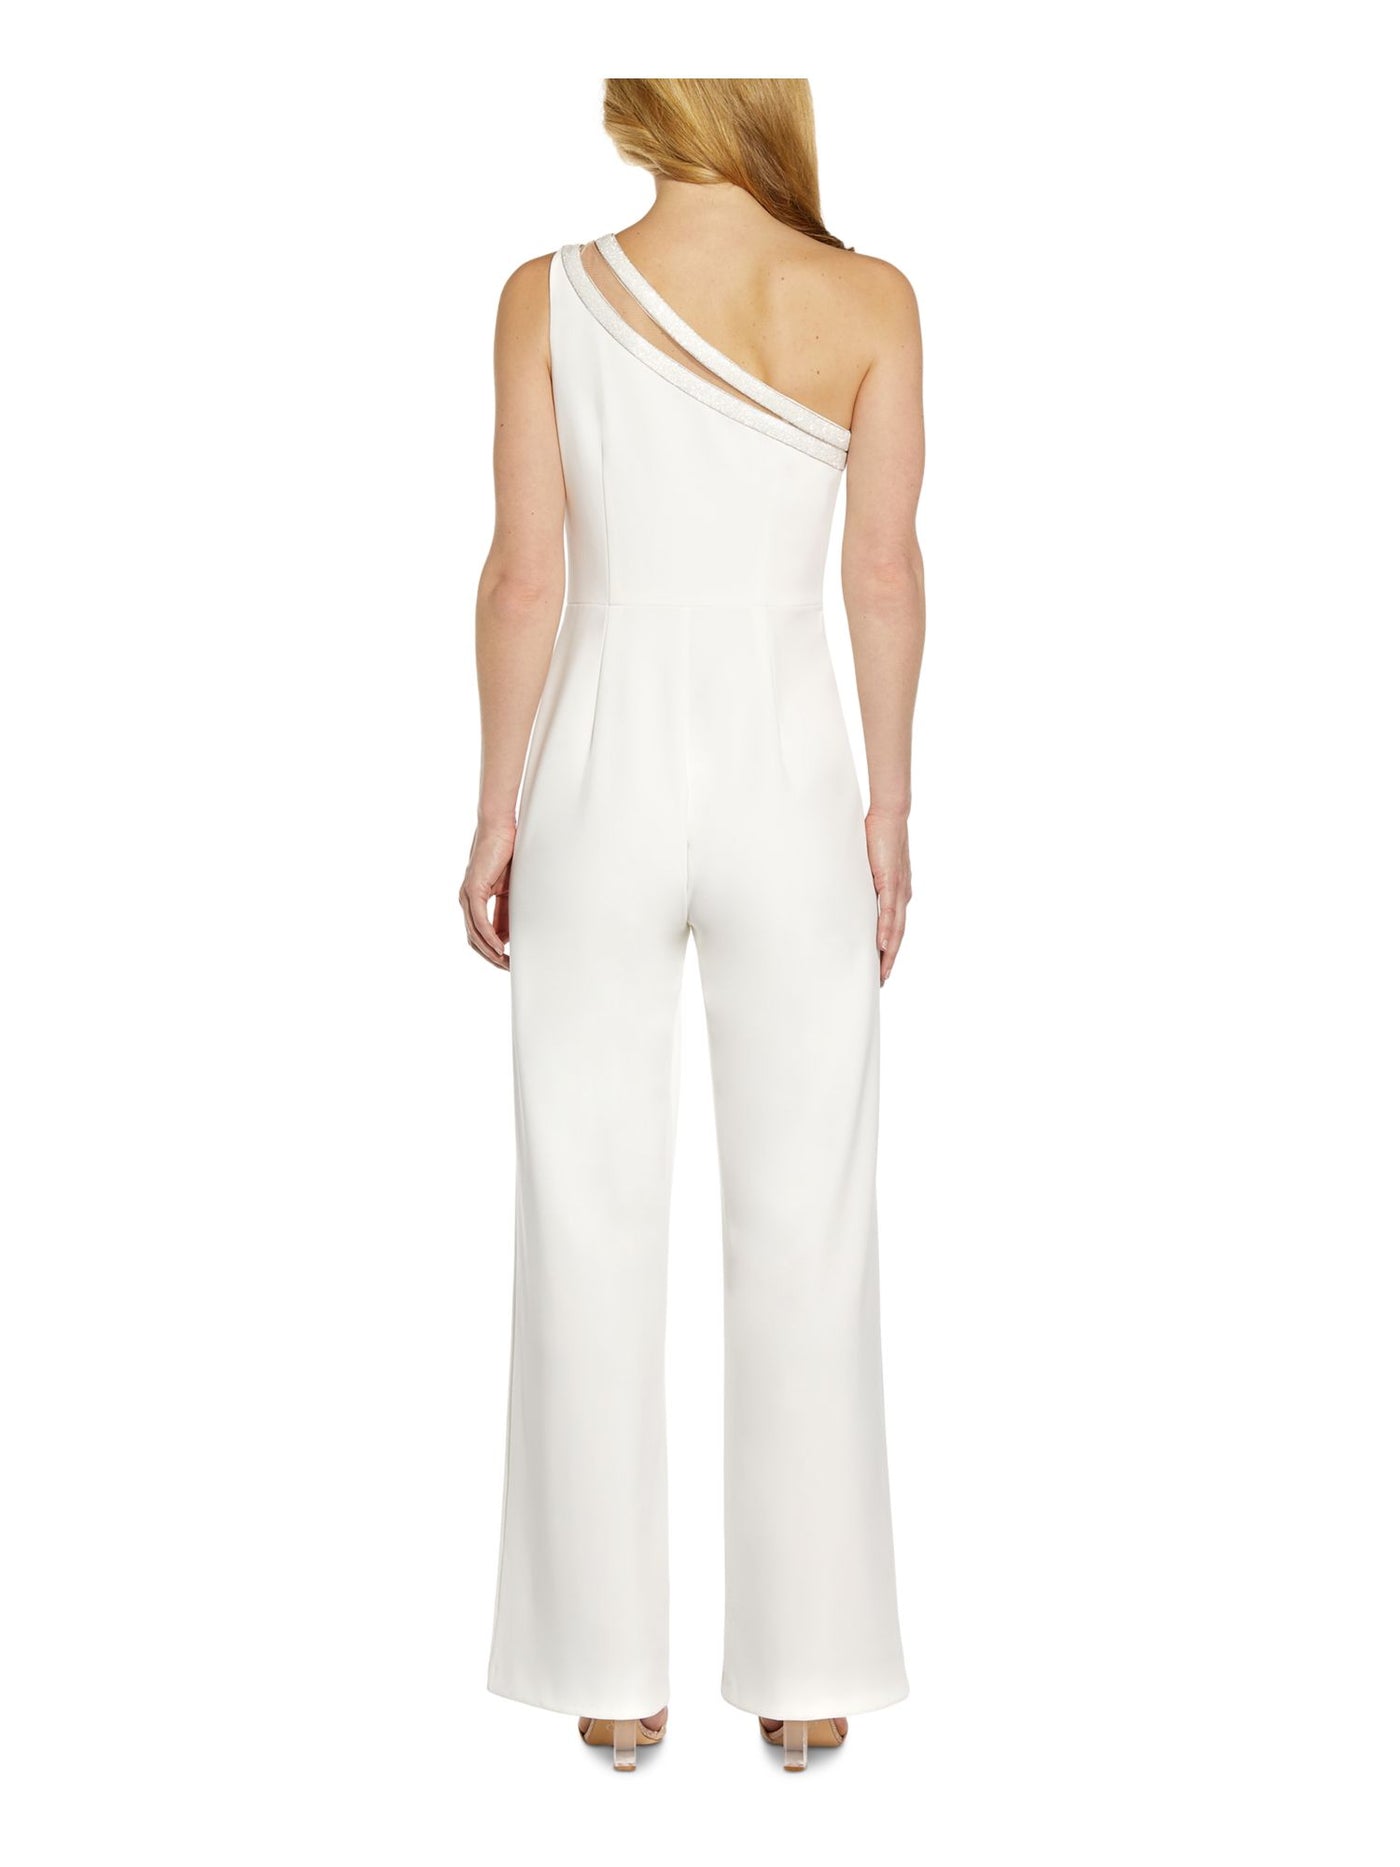 ADRIANNA PAPELL Womens White Stretch Zippered Embellished Illusion Sleeveless Asymmetrical Neckline Formal Jumpsuit 4